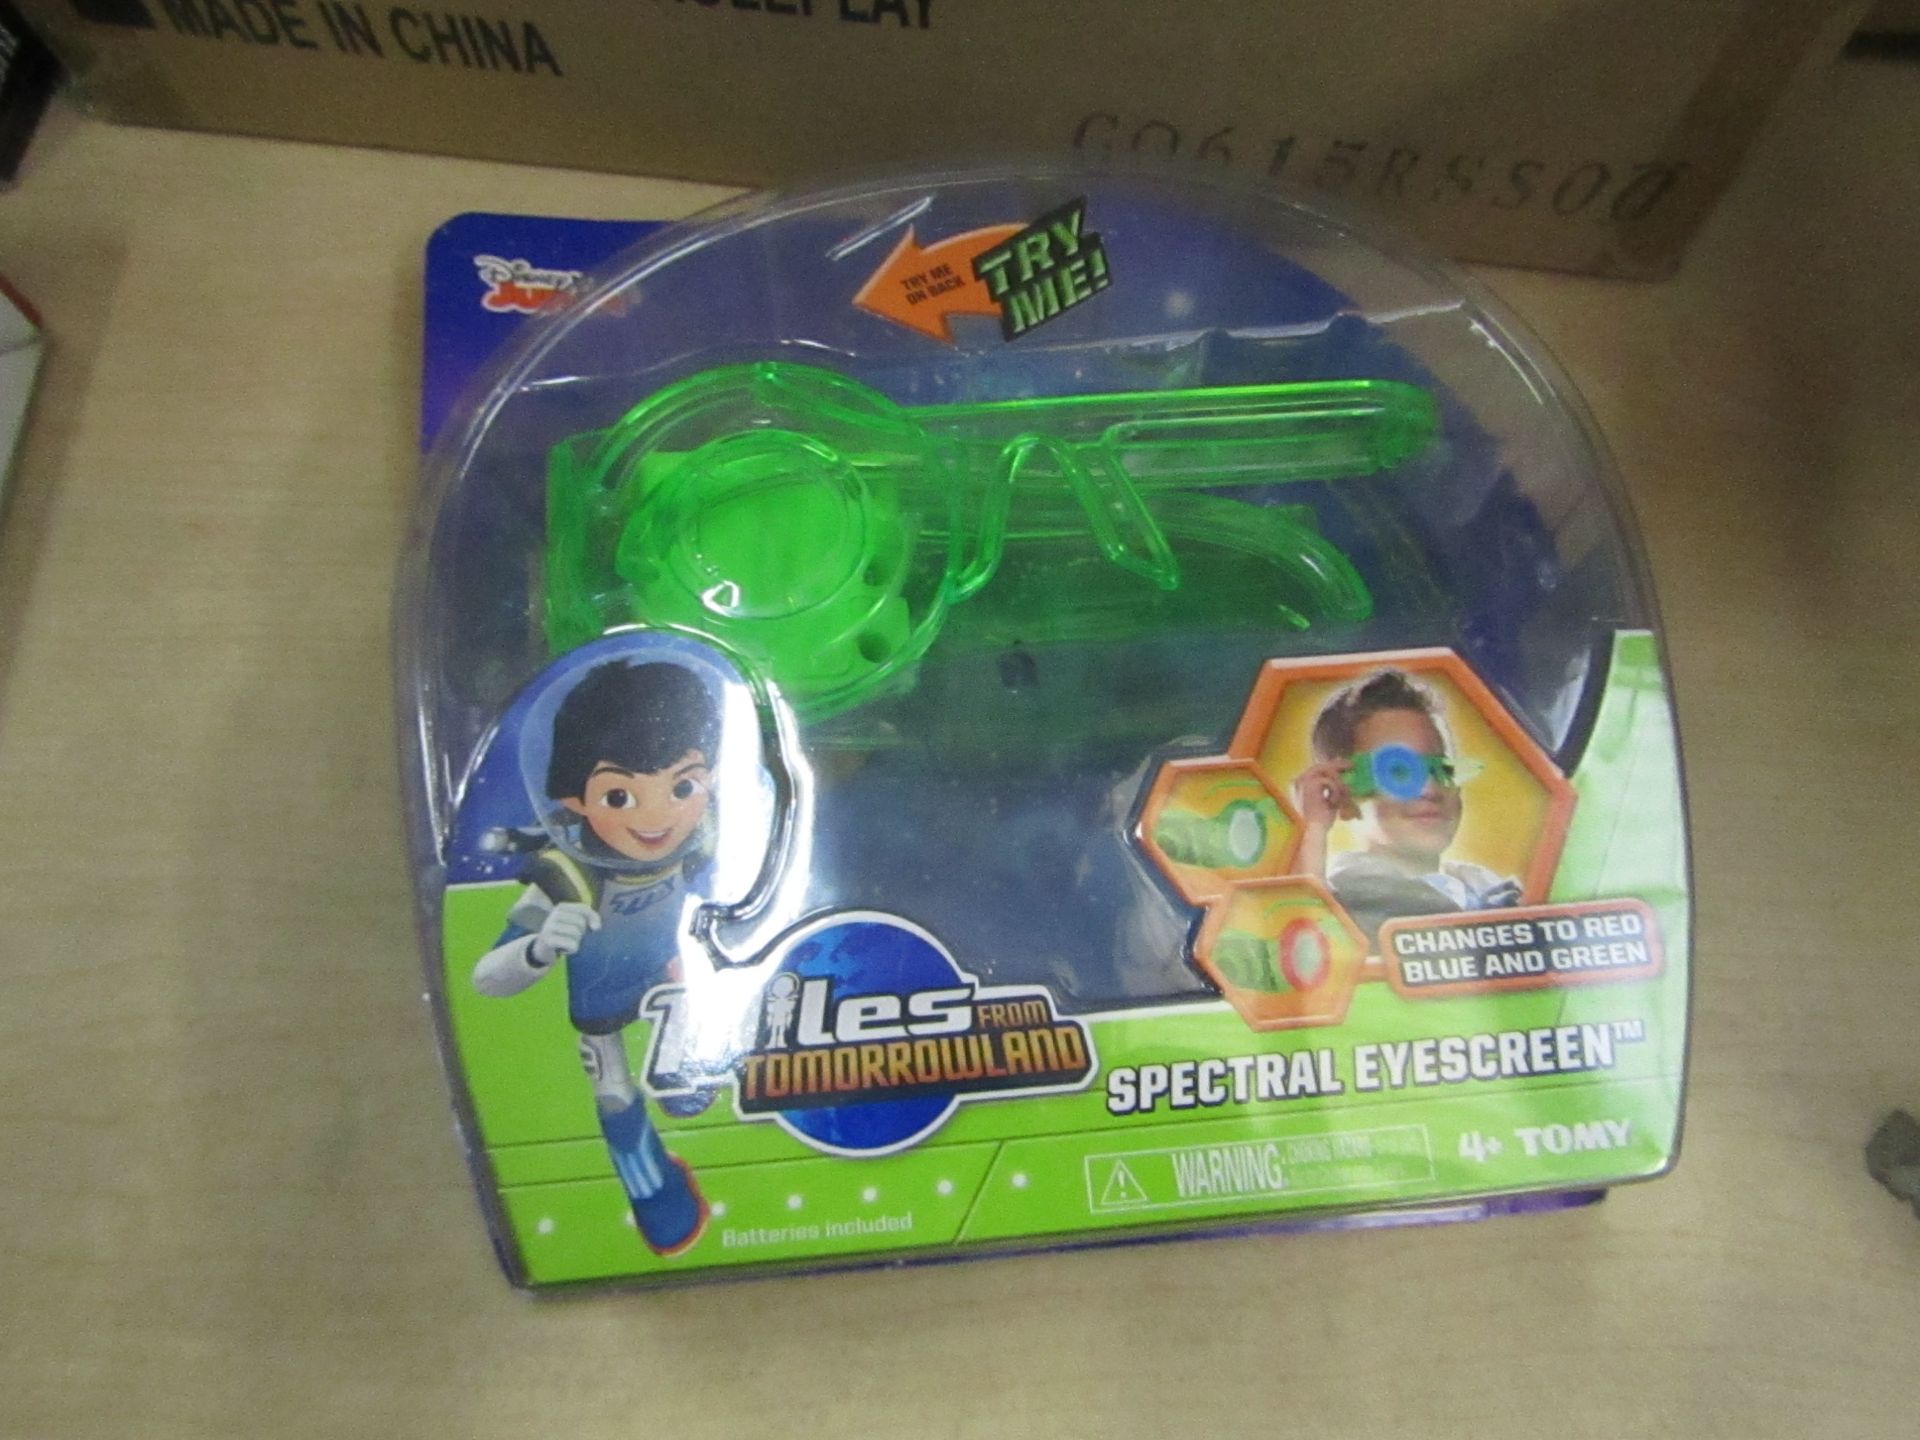 Box of 4 Miles From Tomorrowland Spectral Eyescreen goggles.New & Packaged.Ieal stocking fillers